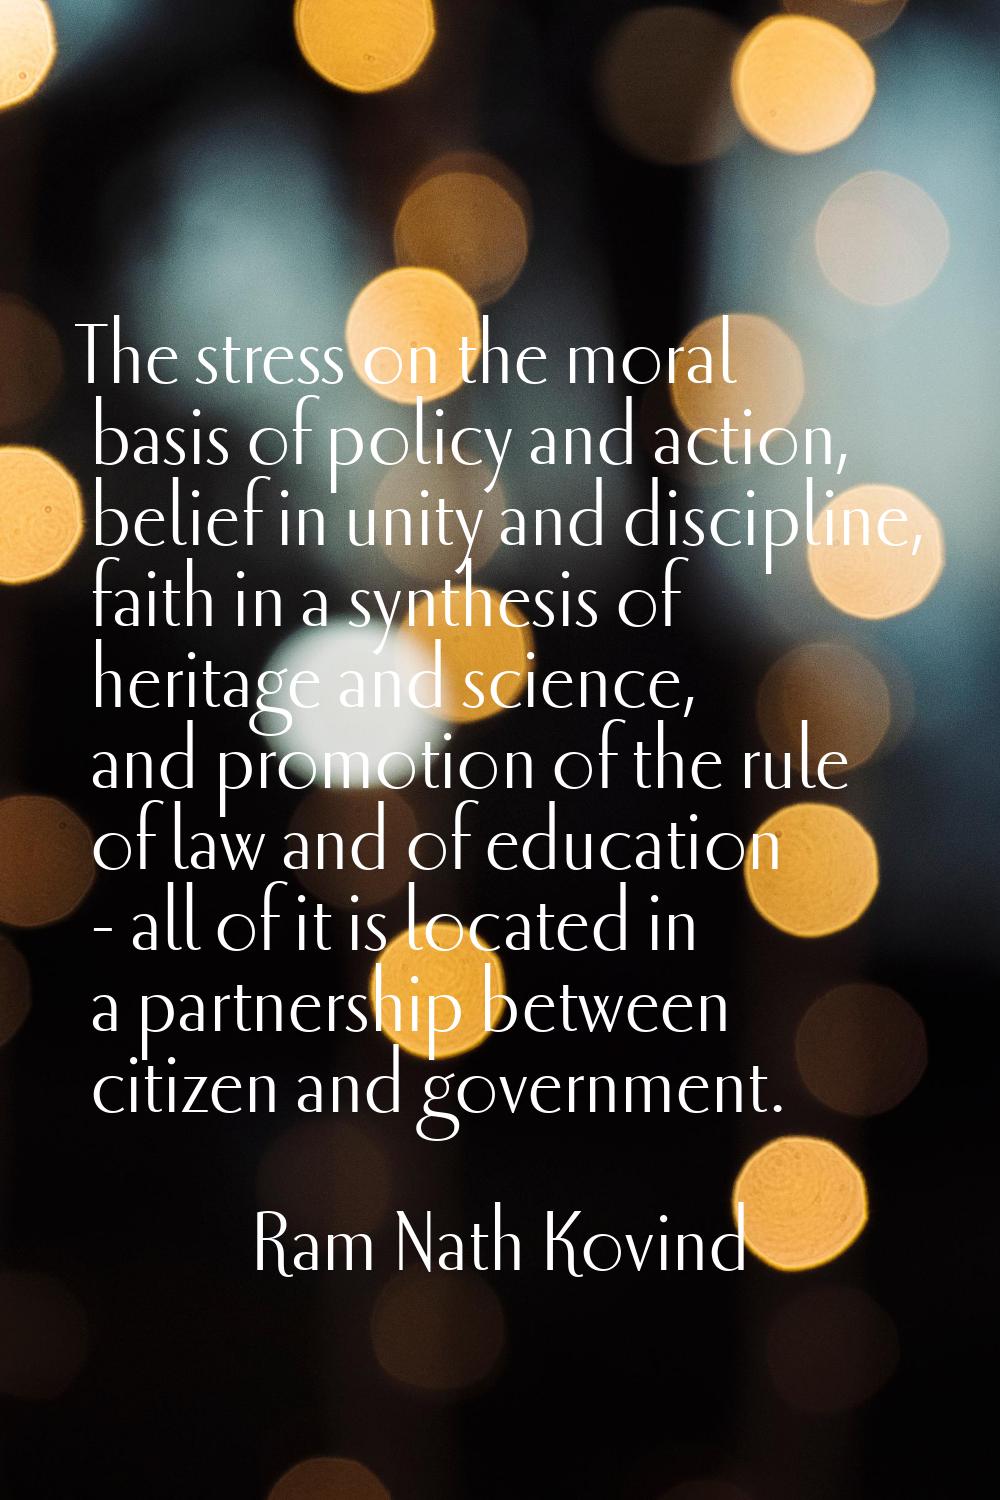 The stress on the moral basis of policy and action, belief in unity and discipline, faith in a synt